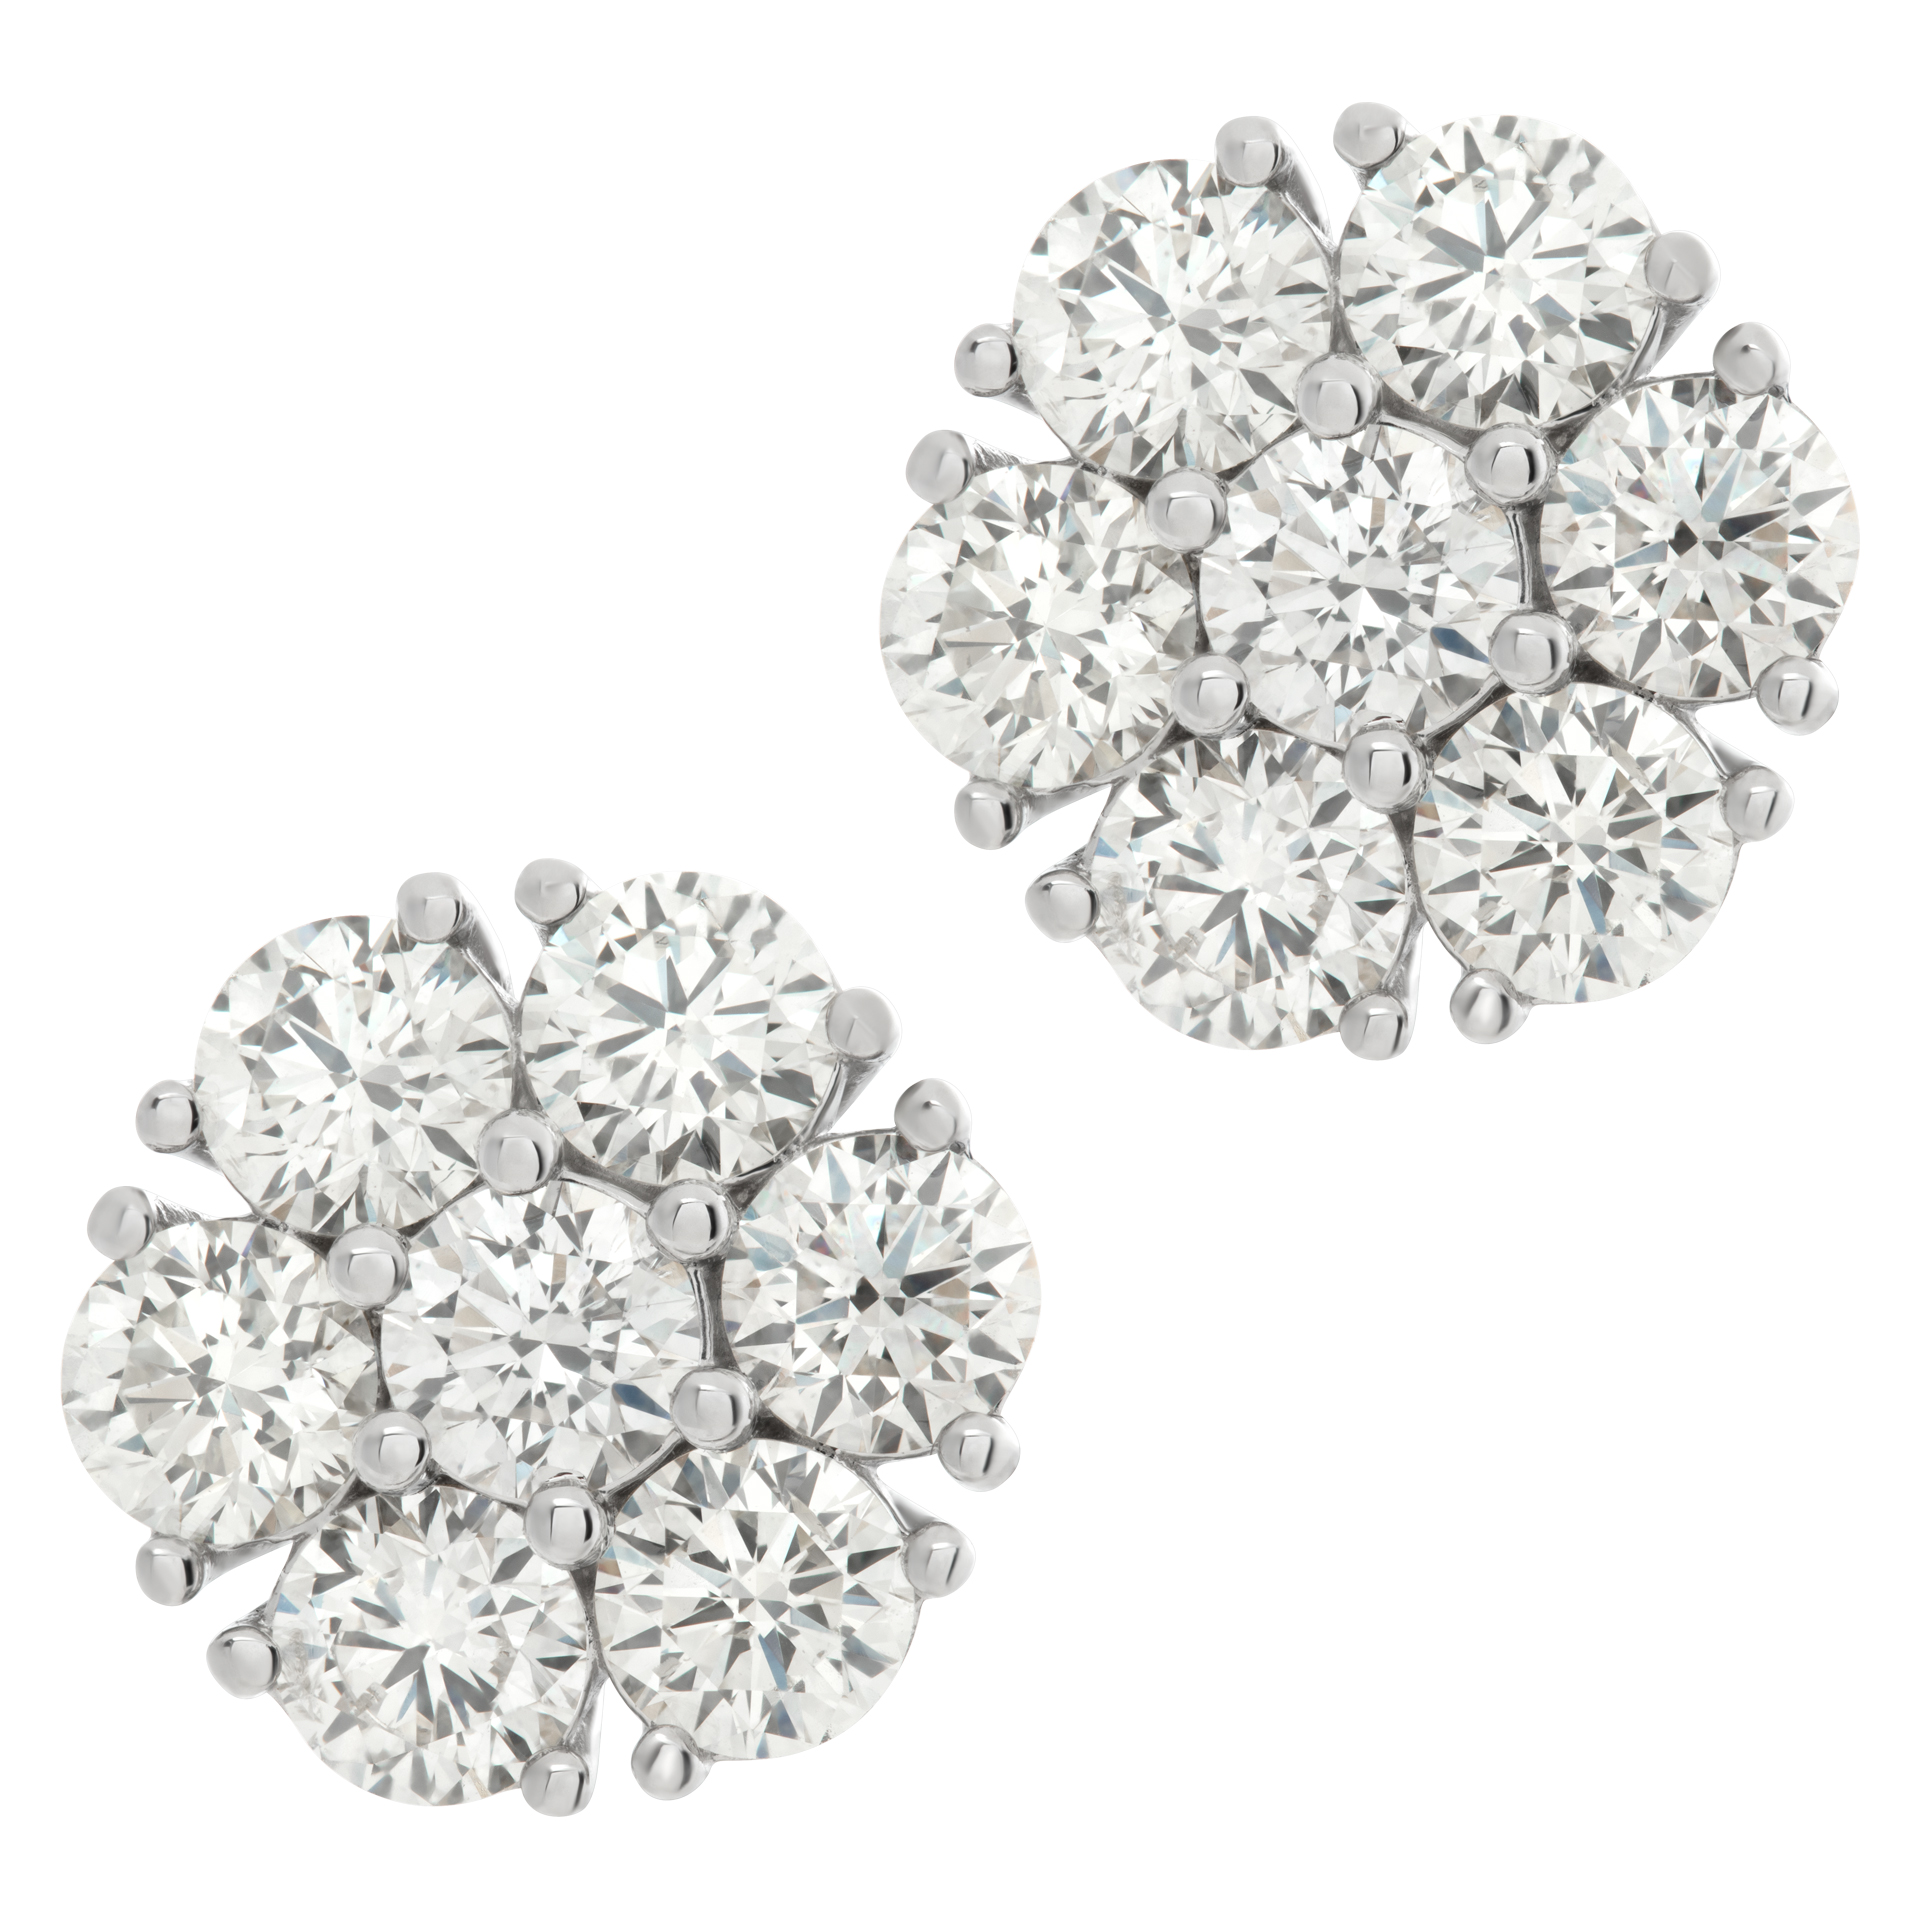 Diamond earrings in 14k white gold with 2.85 carats in diamonds.